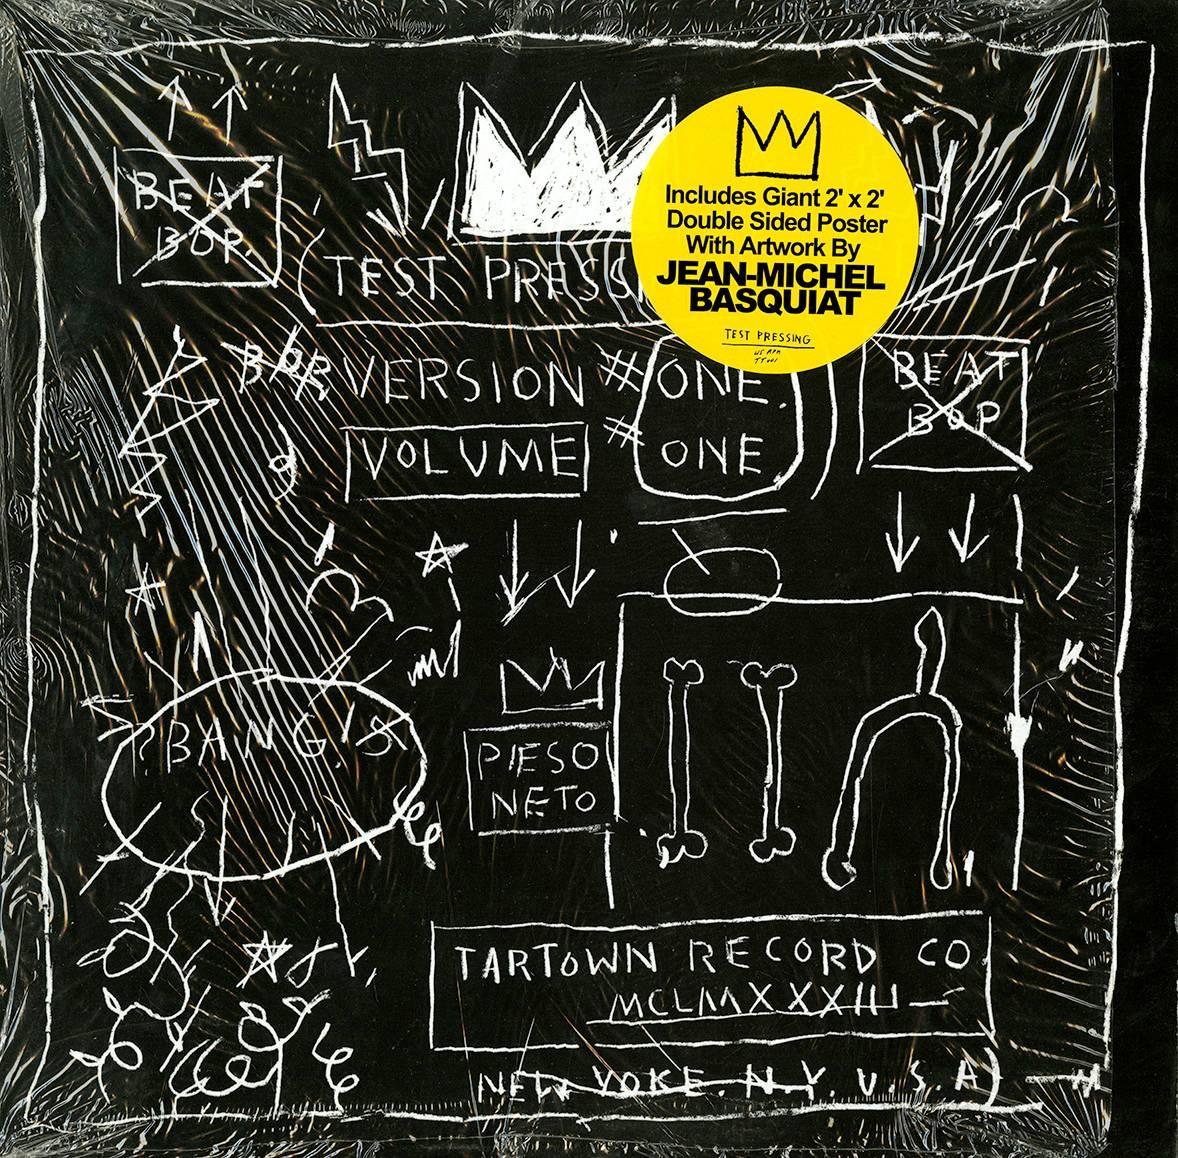 After Jean Michel Basquiat 
Beat Bop Vinyl Record featuring off-set cover &amp; record label art by Basquiat. This pressing was published c.2005 featuring a limited edition 24 x 24 inch (61 x 61 cm) two-sided fold-out poster. 

Offset lithograph on